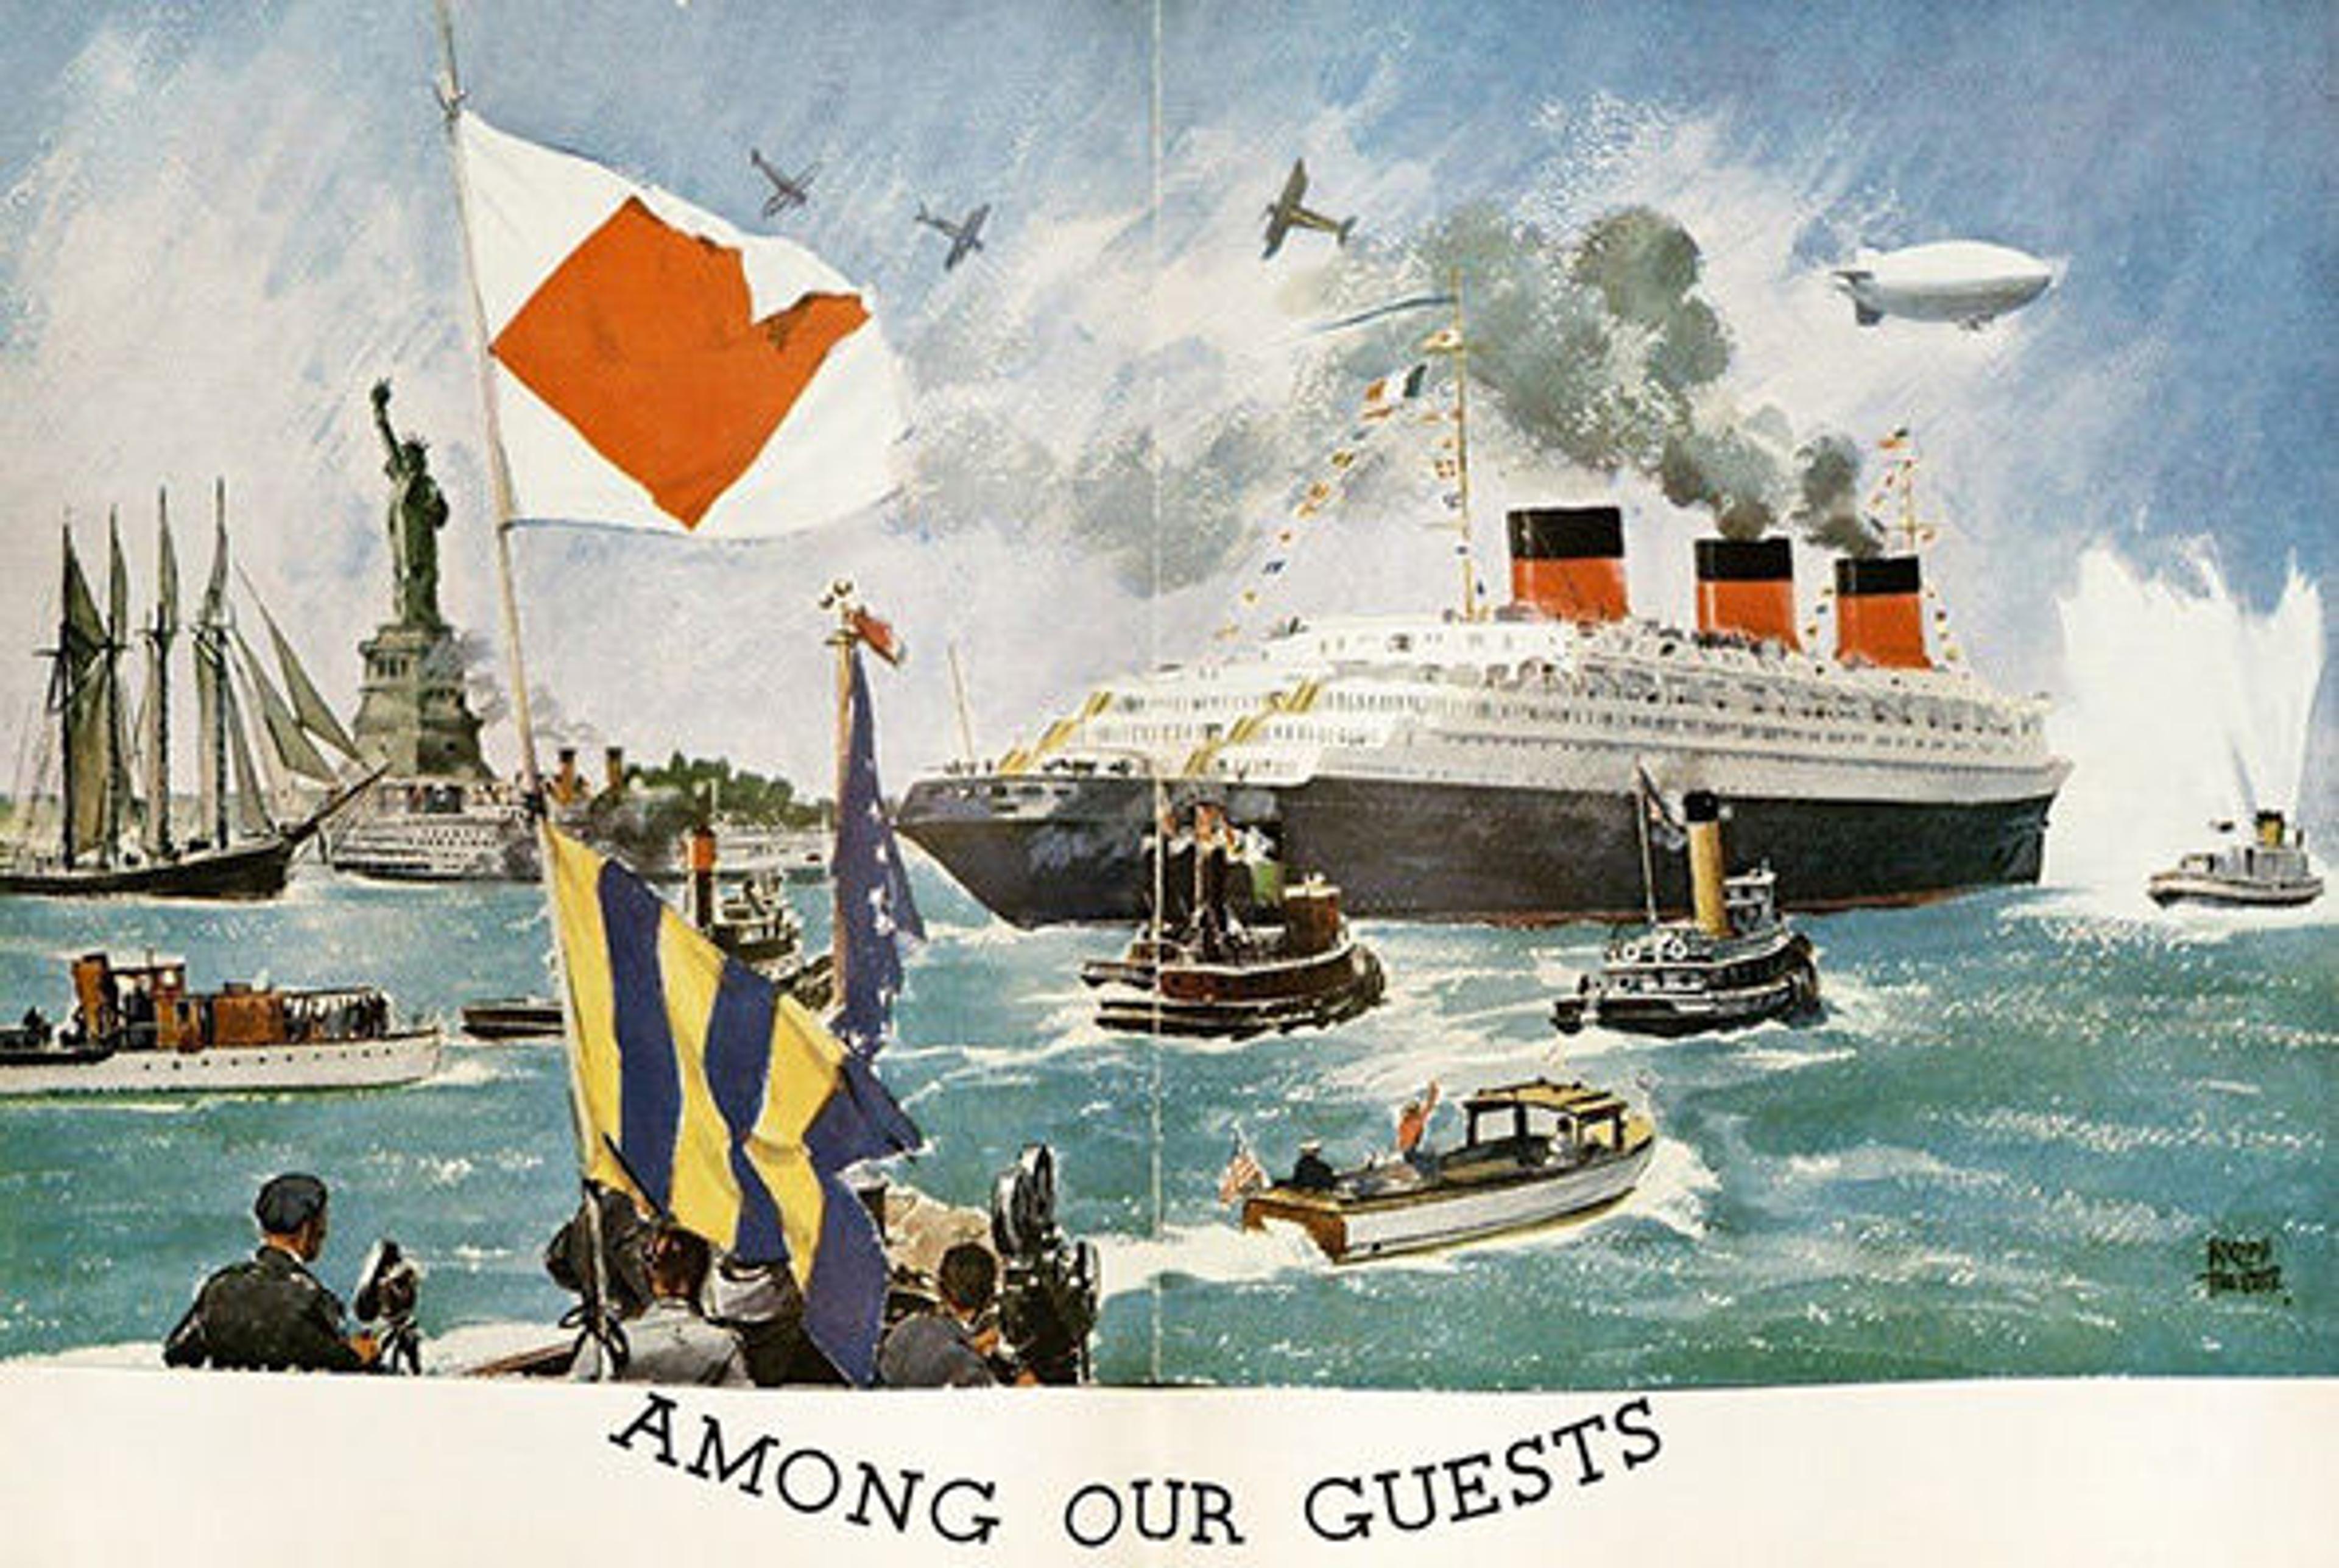 The Normandie making its way to the New York City harbor, from the brochure of the Normandie's maiden voyage, Gangplank (1935)]